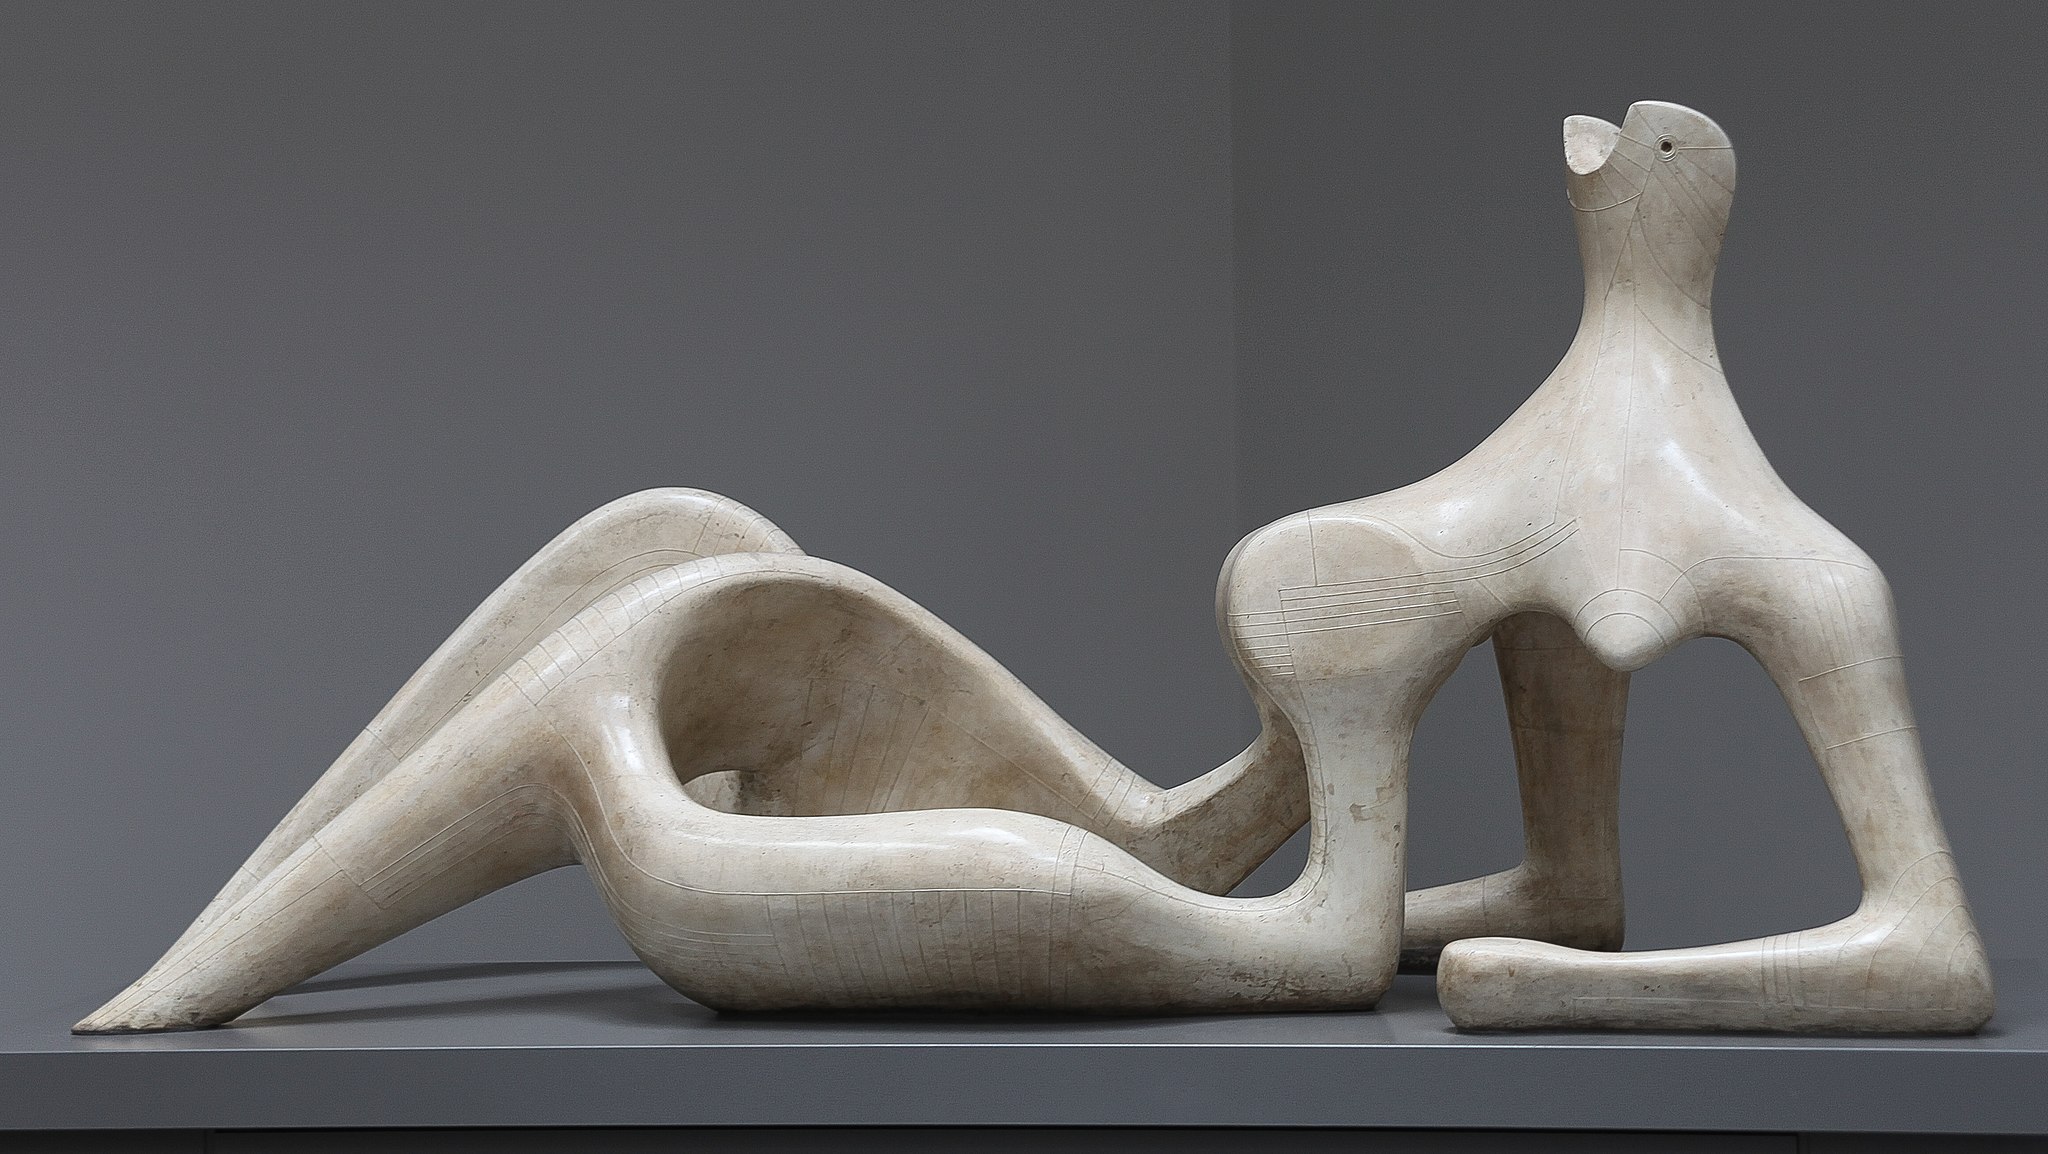 A model for Henry Moore’s “Reclining Figure” (1951)